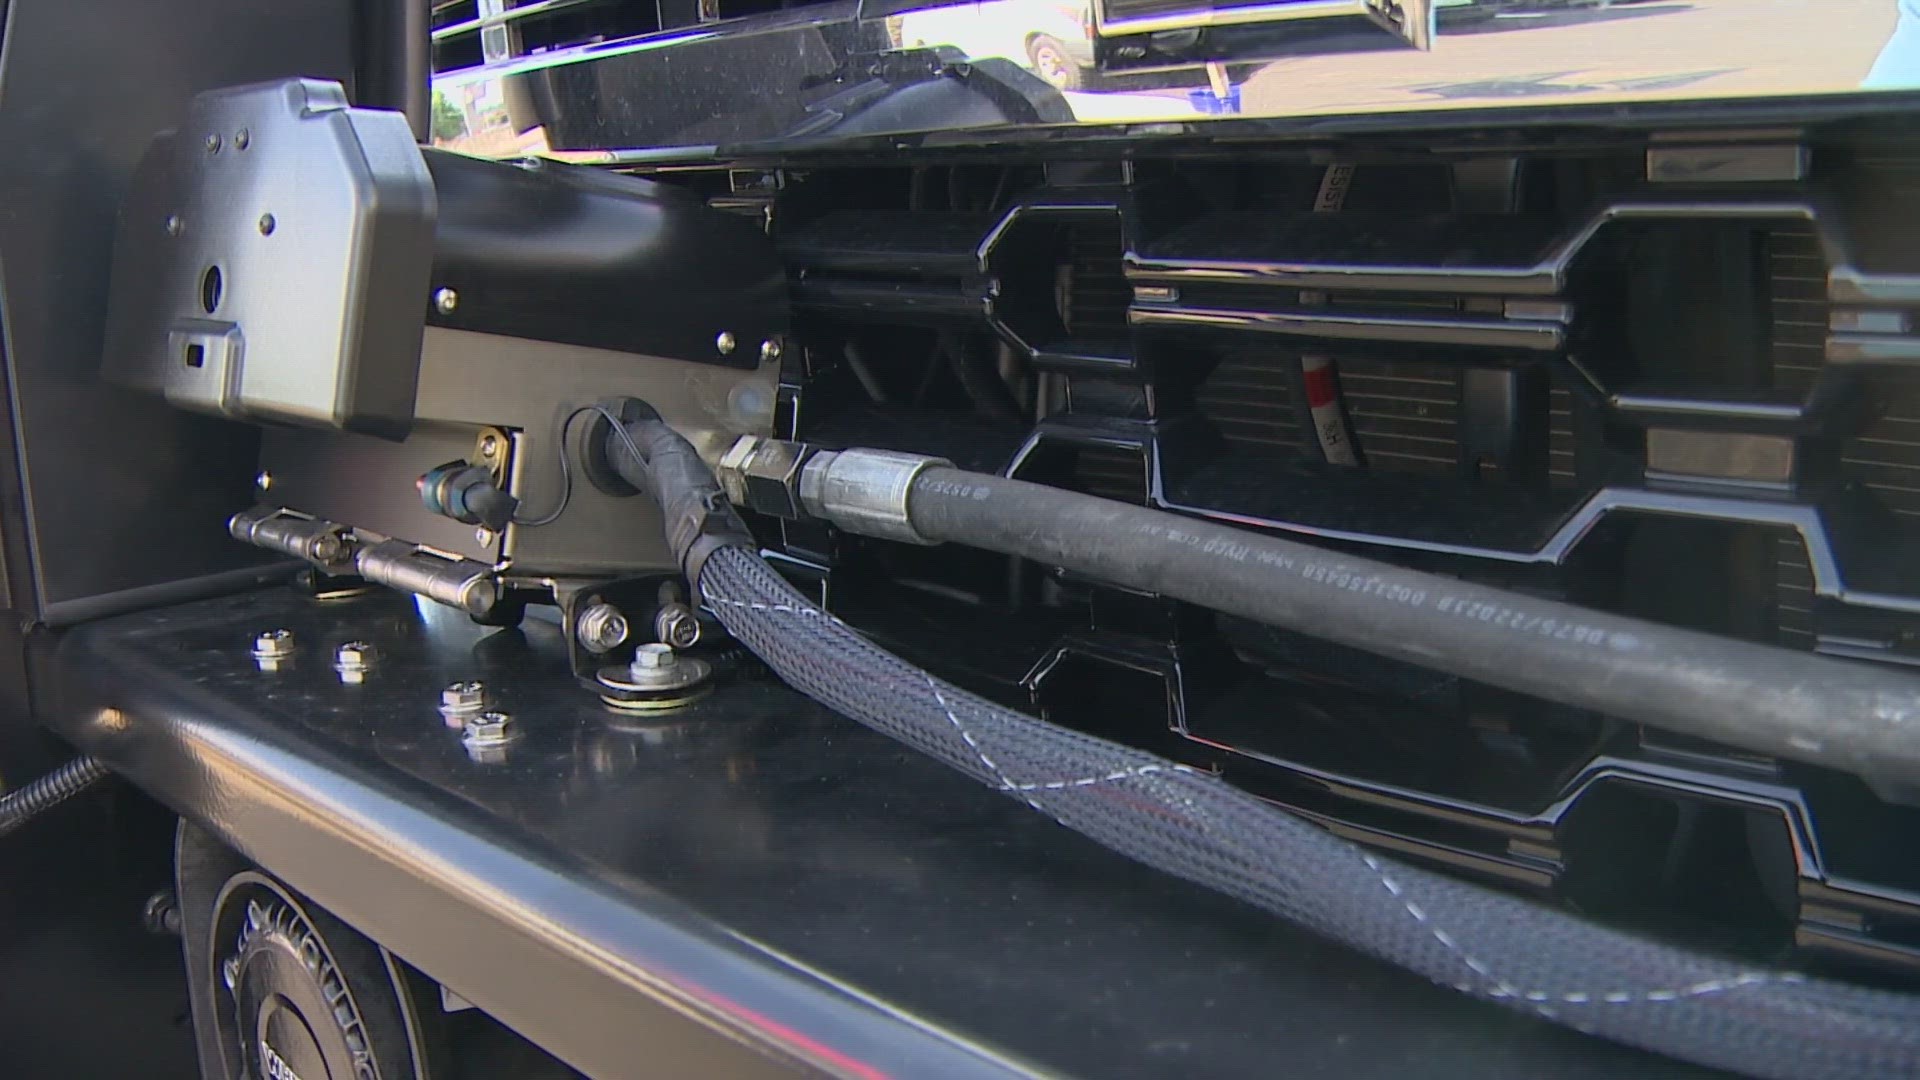 At the press of a button, a small air compressor inside the squad car’s engine bay can propel a GPS tracker through the air and onto the back of a suspect’s vehicle.